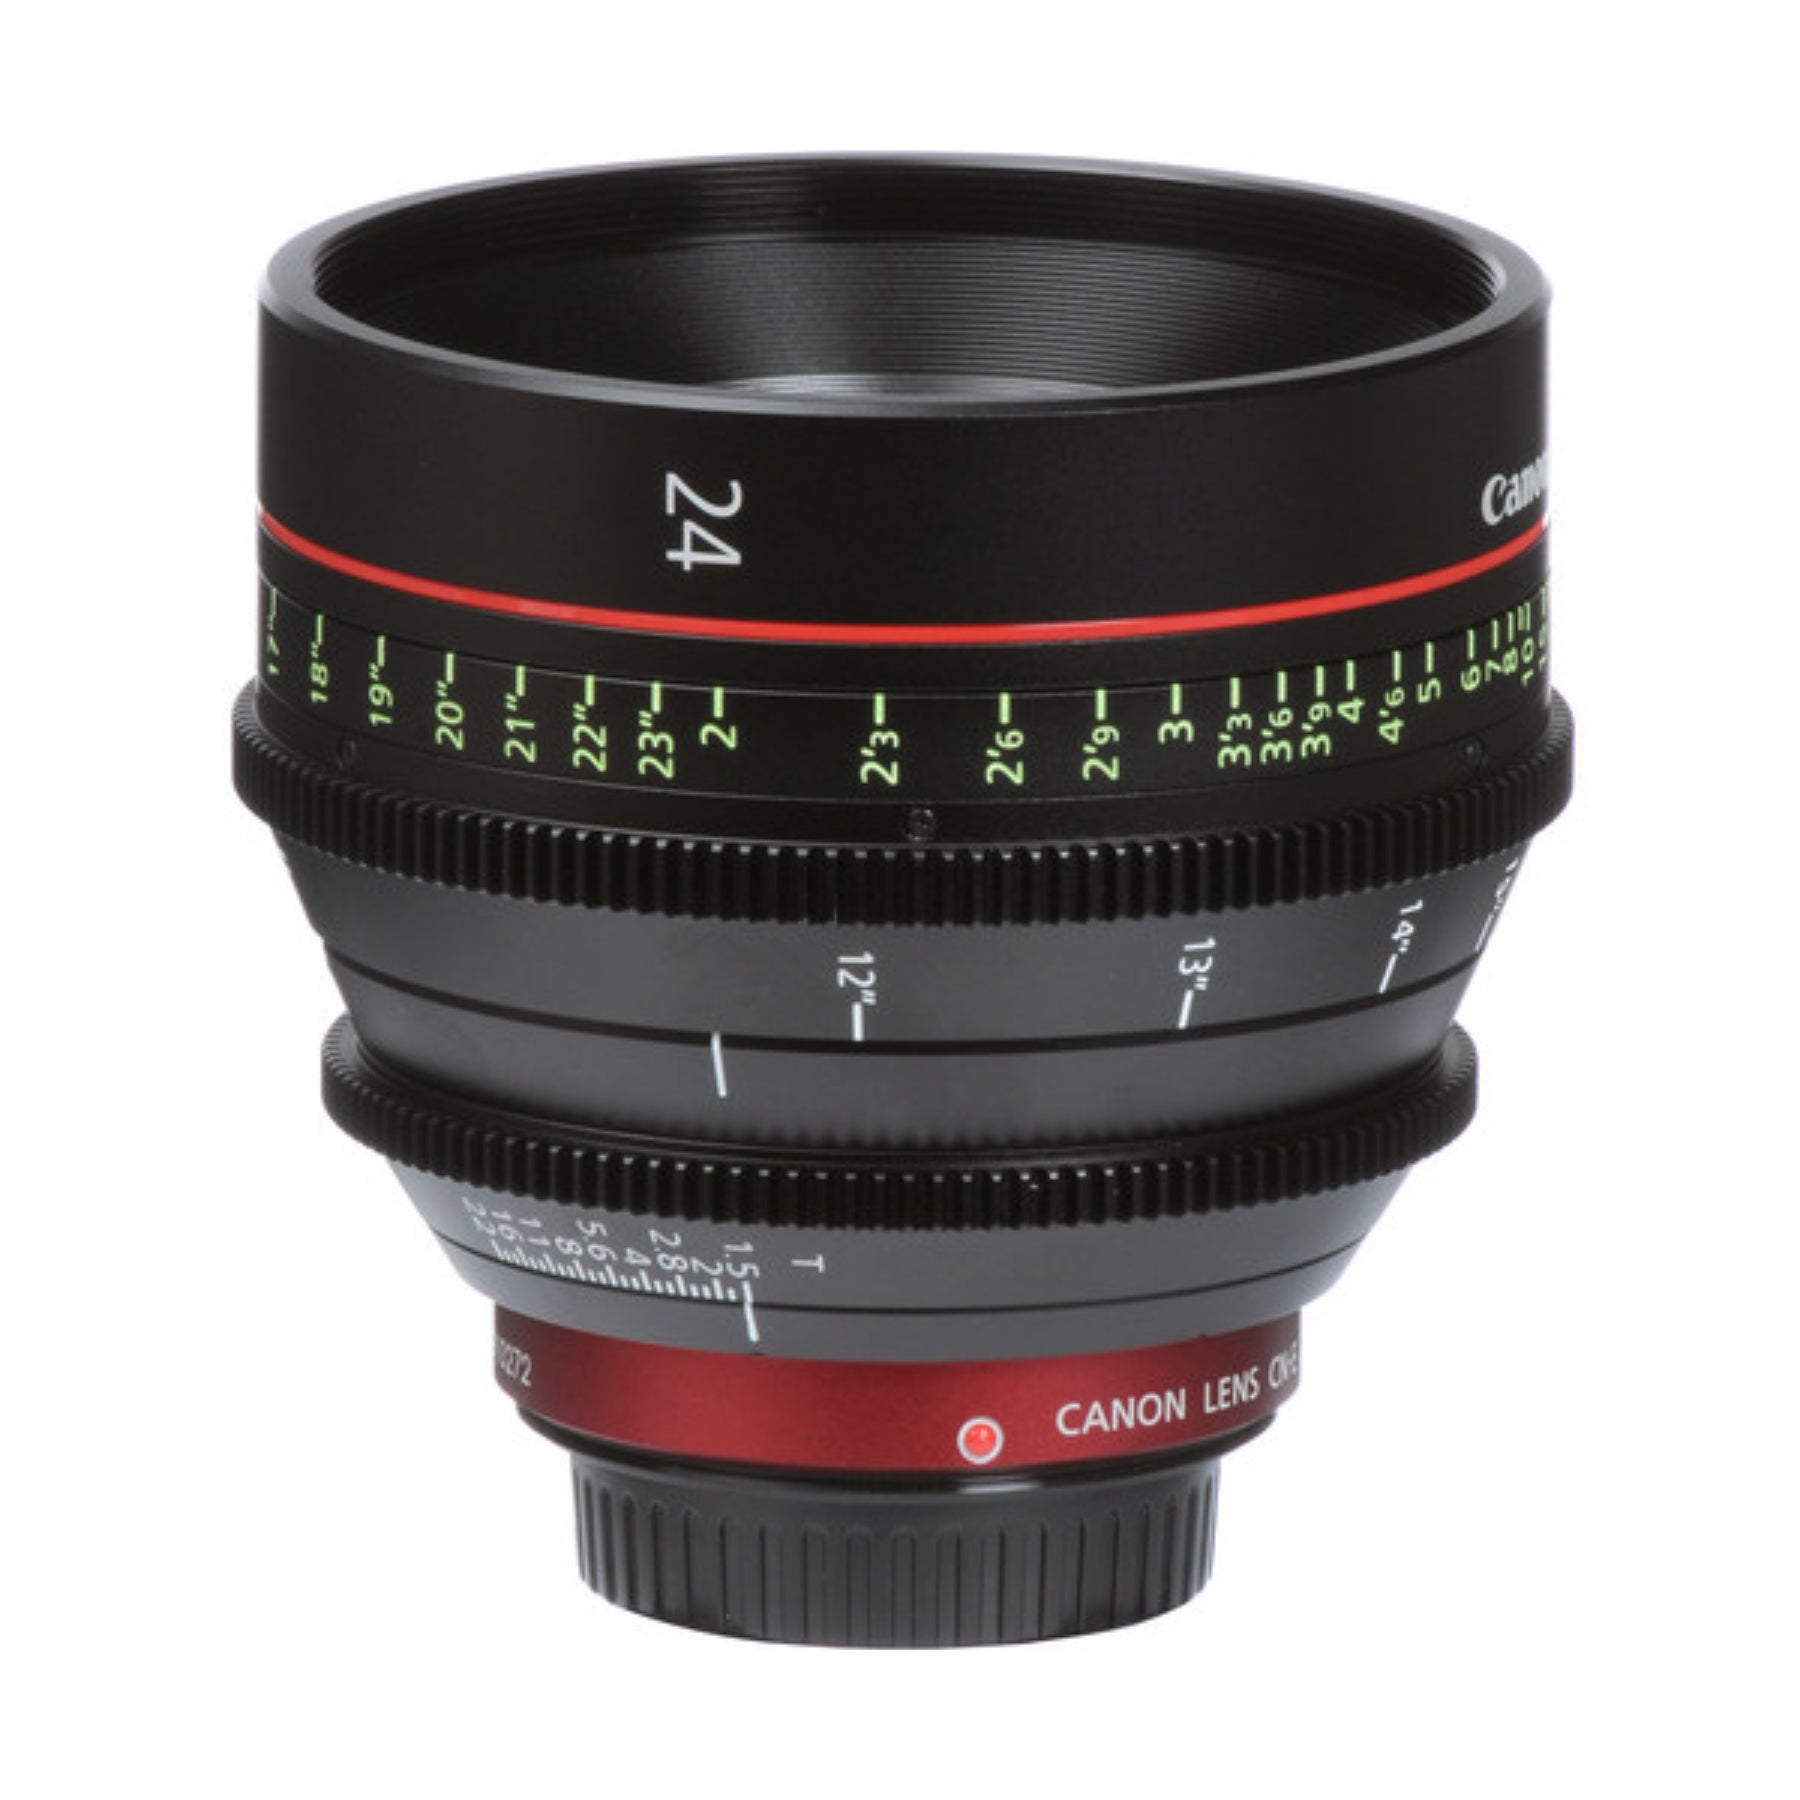 Canon CN-E 24mm T 1.5 EF lens for hire at Topic Rentals